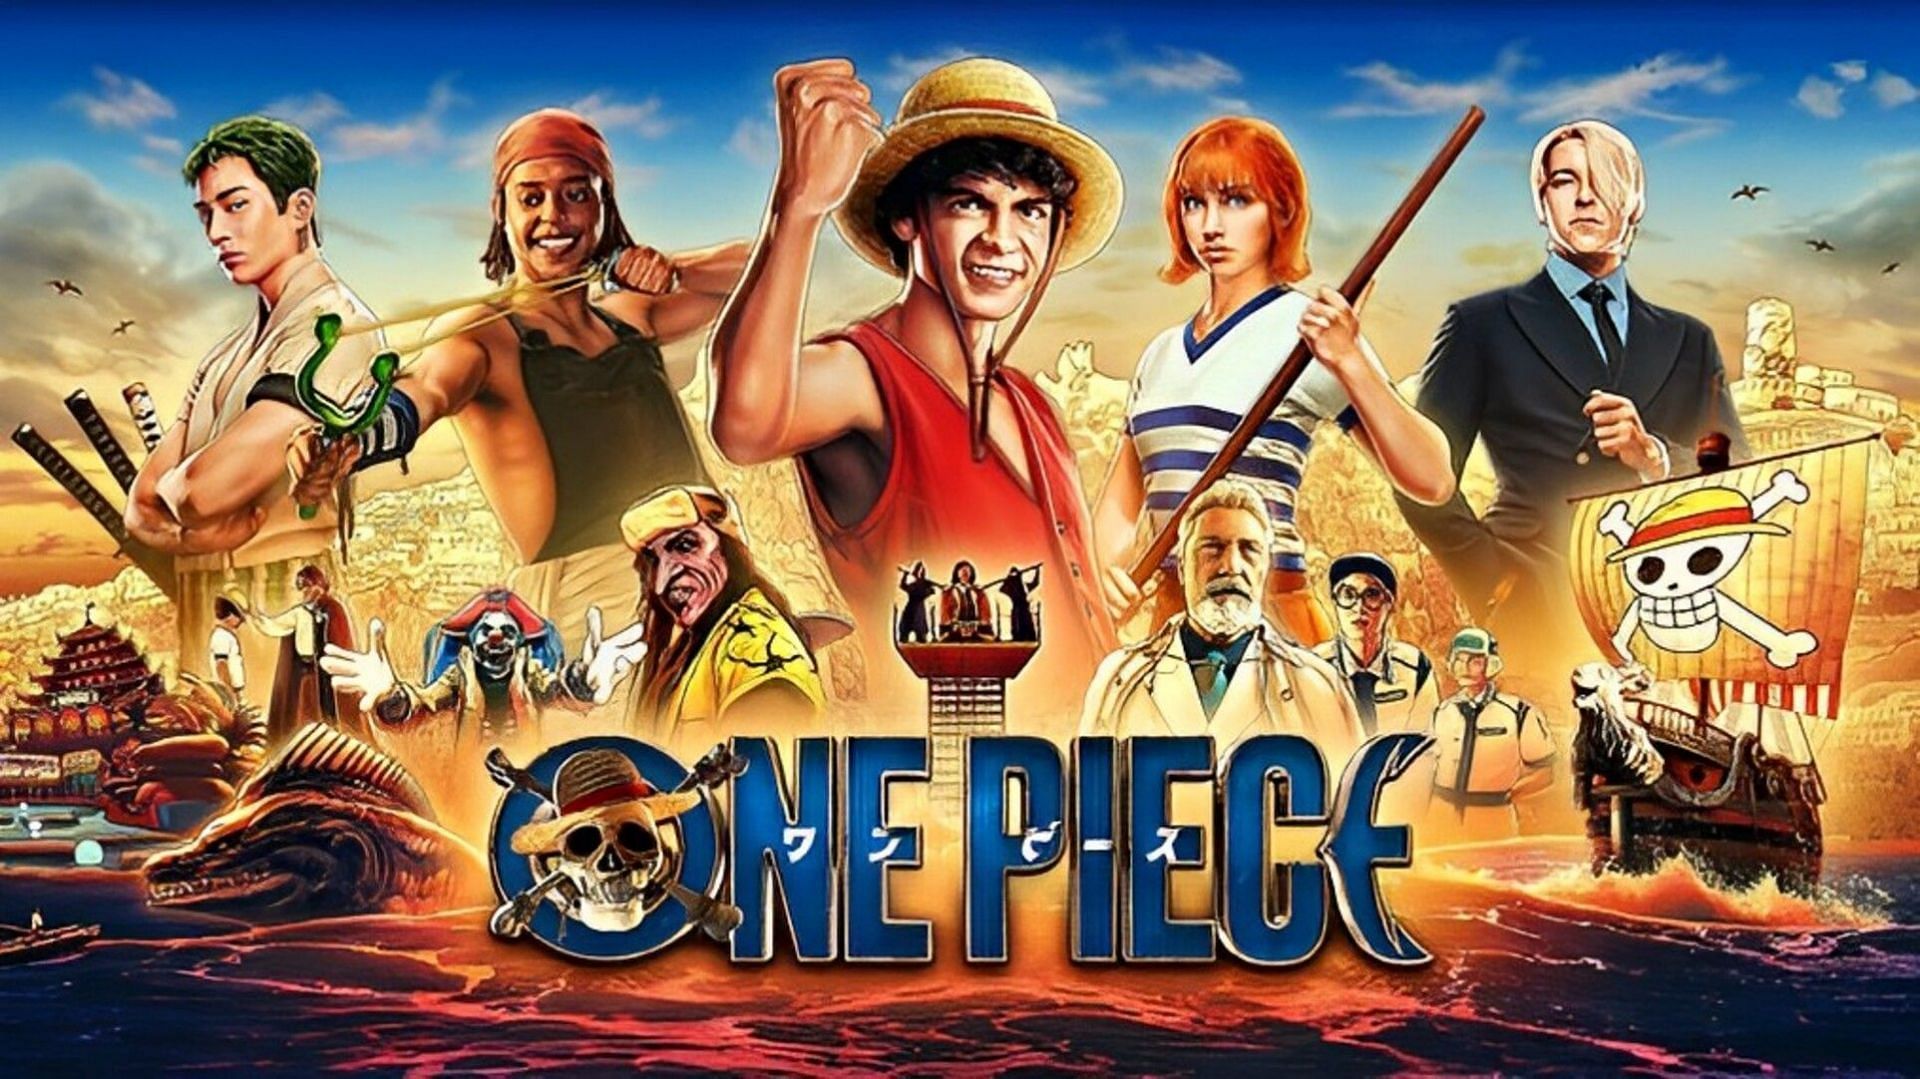 One Piece live action Going Merry disappoints everyone